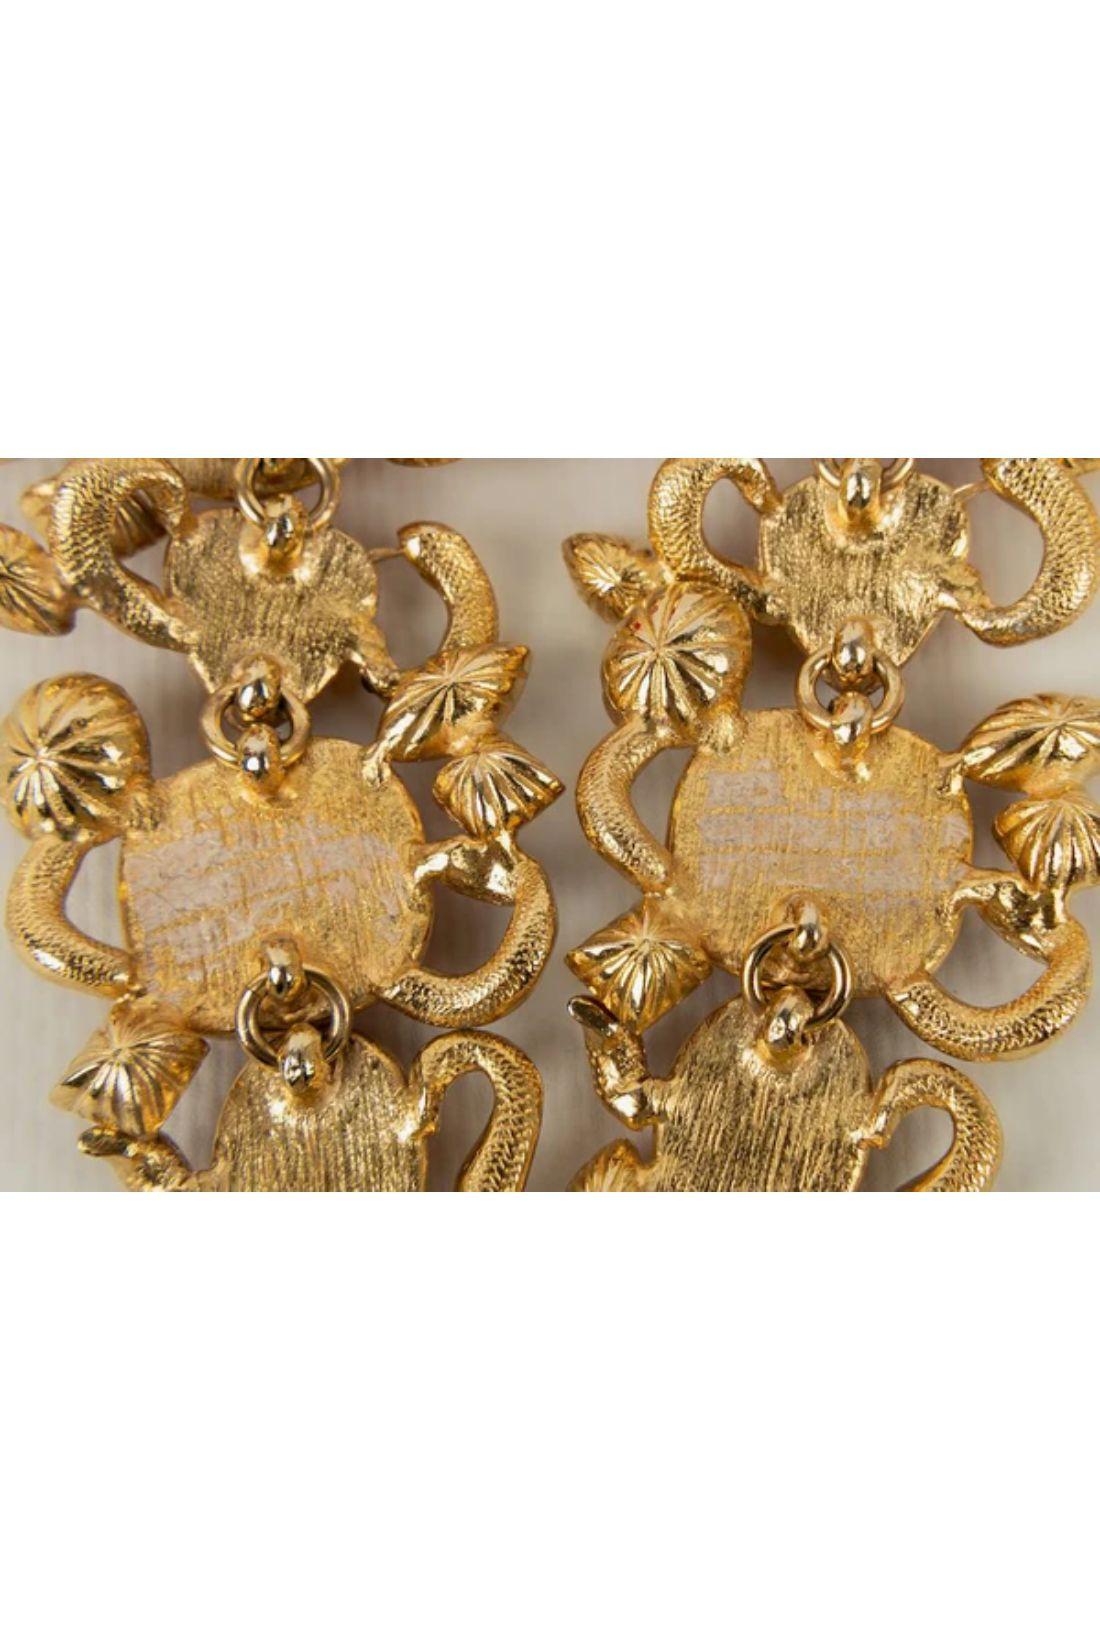 Yves Saint Laurent Earrings in Gold Plated Rhinestone and Resin In Excellent Condition For Sale In SAINT-OUEN-SUR-SEINE, FR